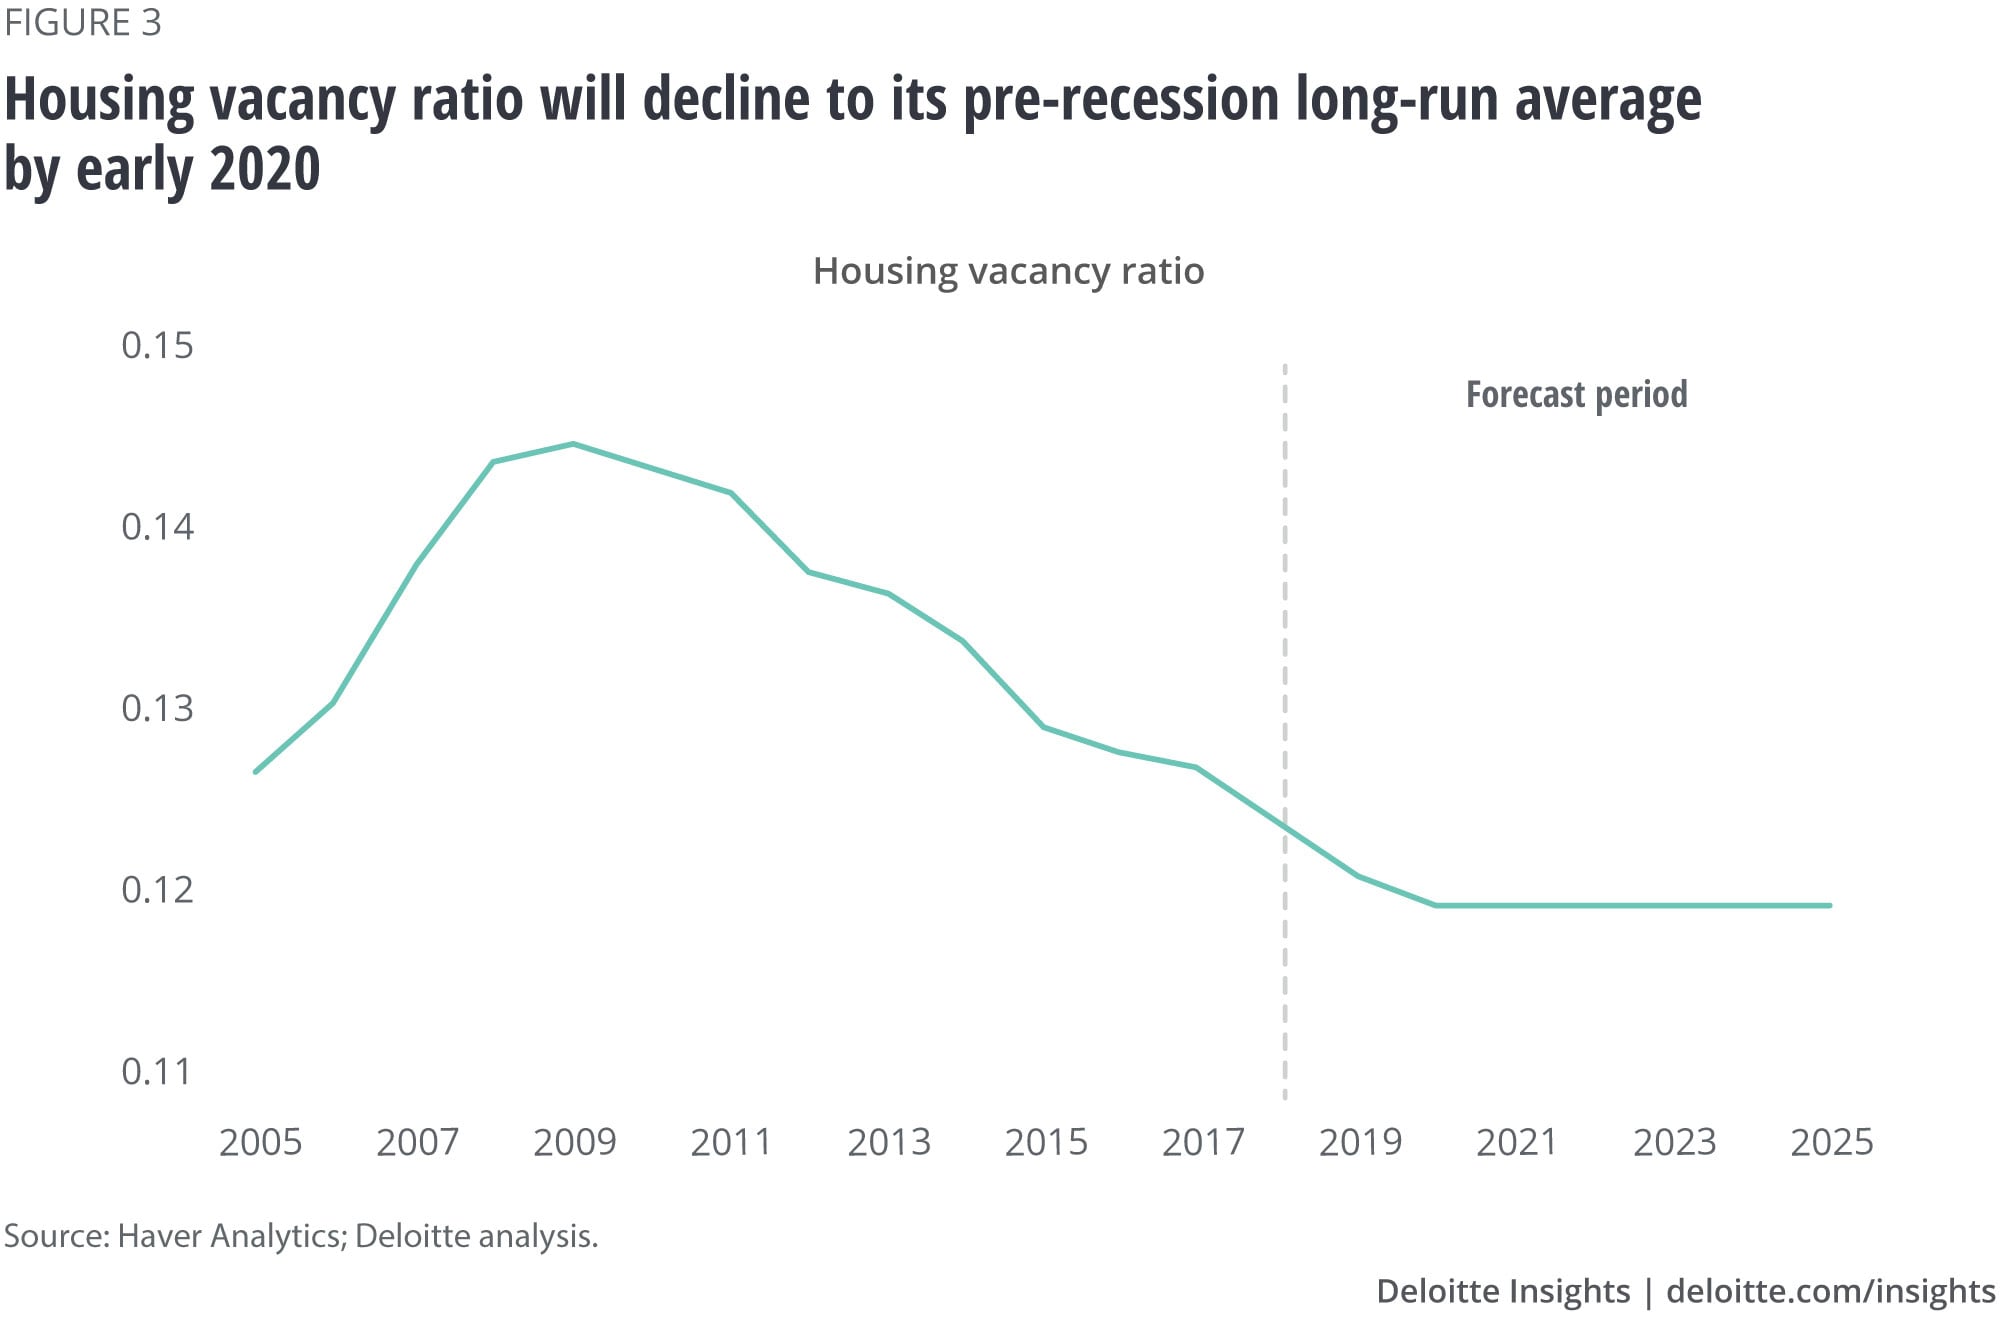 Housing vacancy ratio will decline to its pre-recession long-run average by early 2020